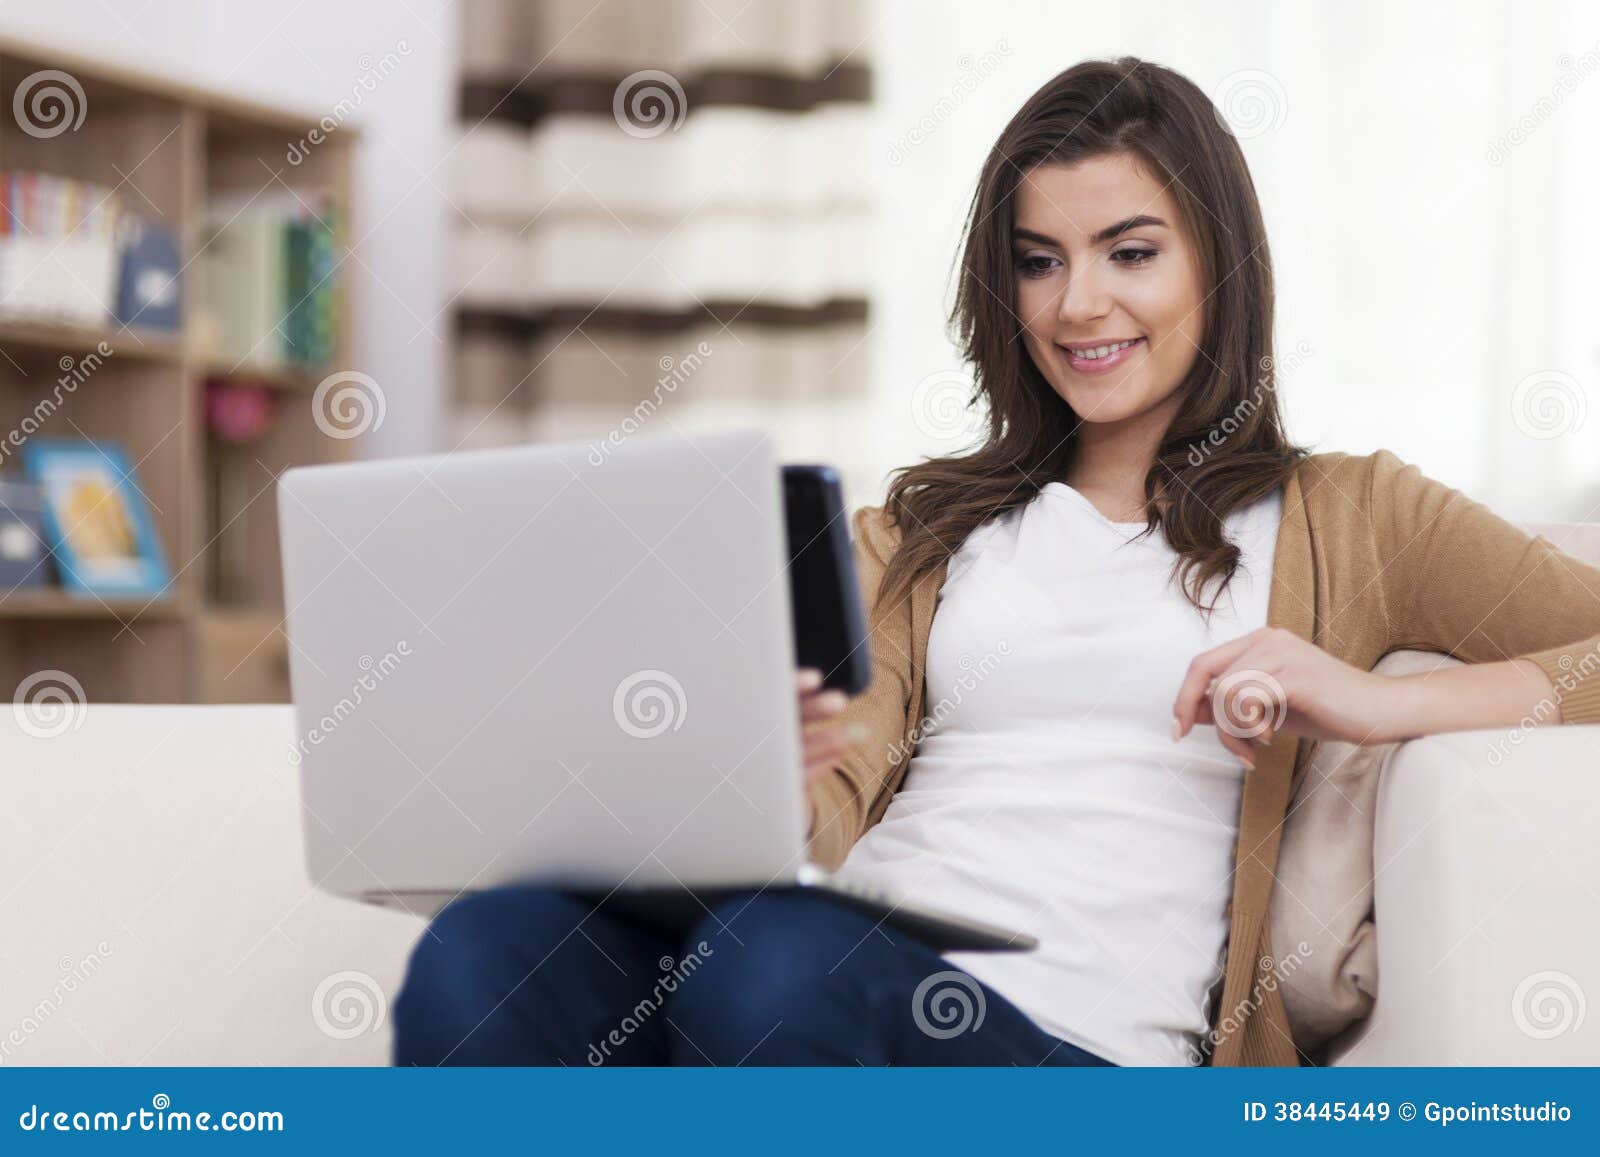 Woman paying by qr code stock image. Image of casual - 38445449